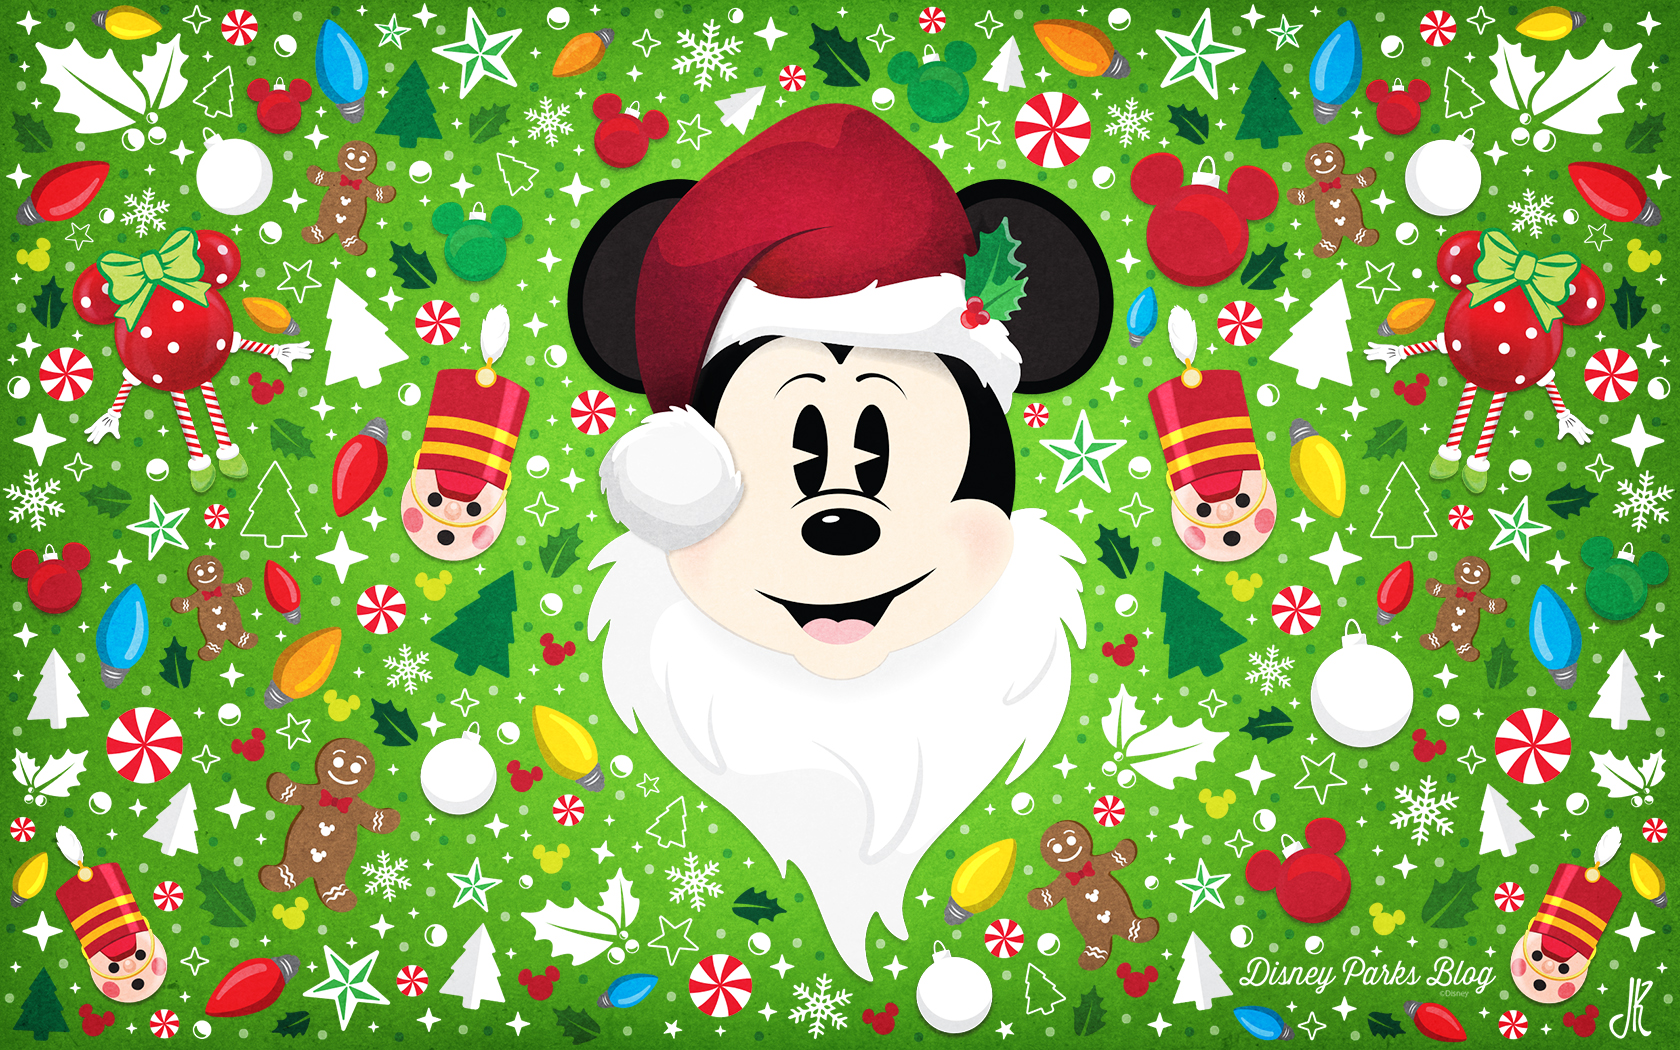 Get Excited For The Season With 18 Holiday Disney Parks Blog Wallpaper. Disney Parks Blog